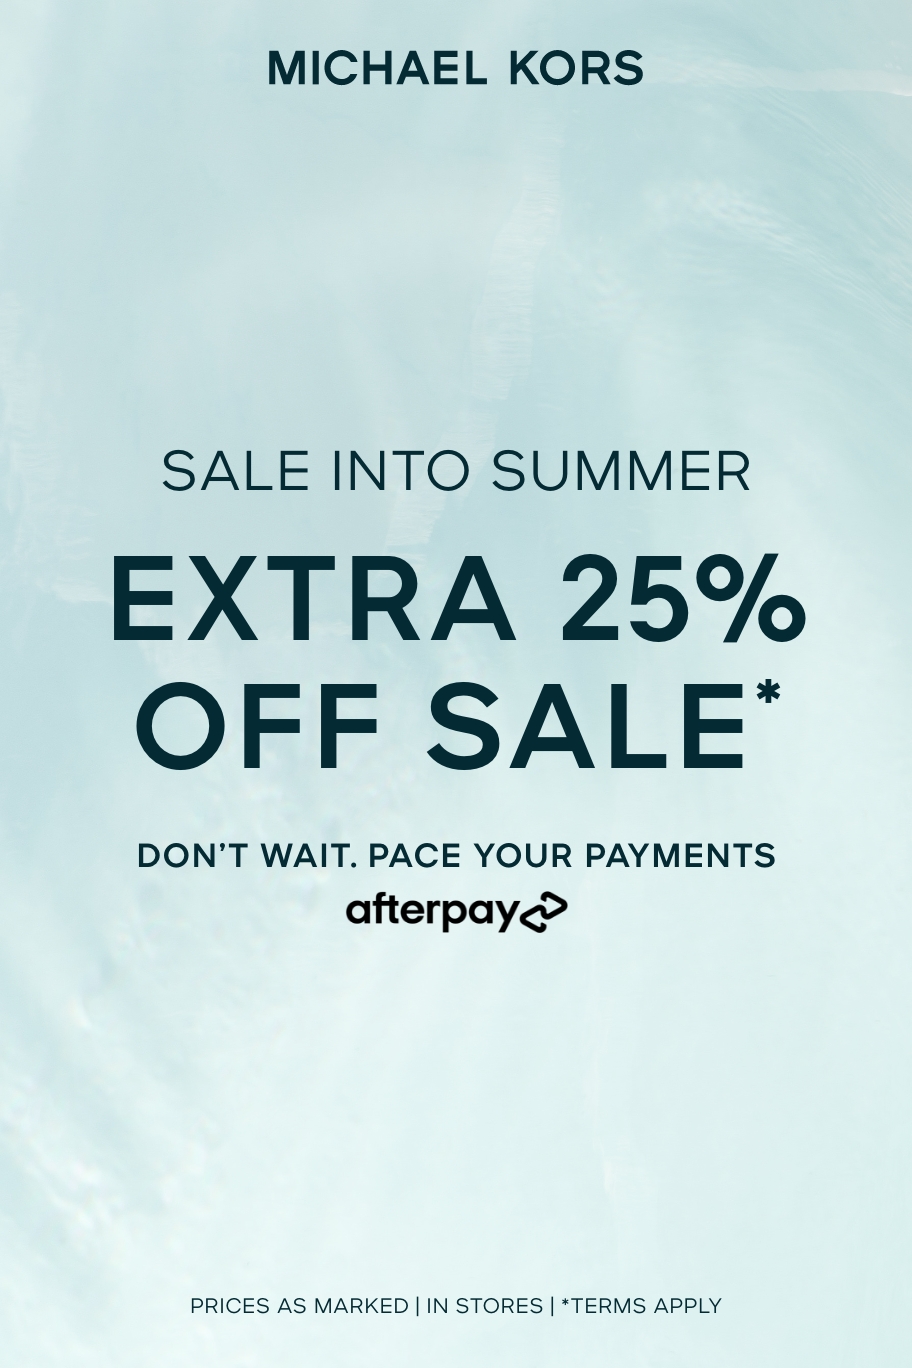 Enjoy An Extra 25% Off Sale. *Terms Apply.